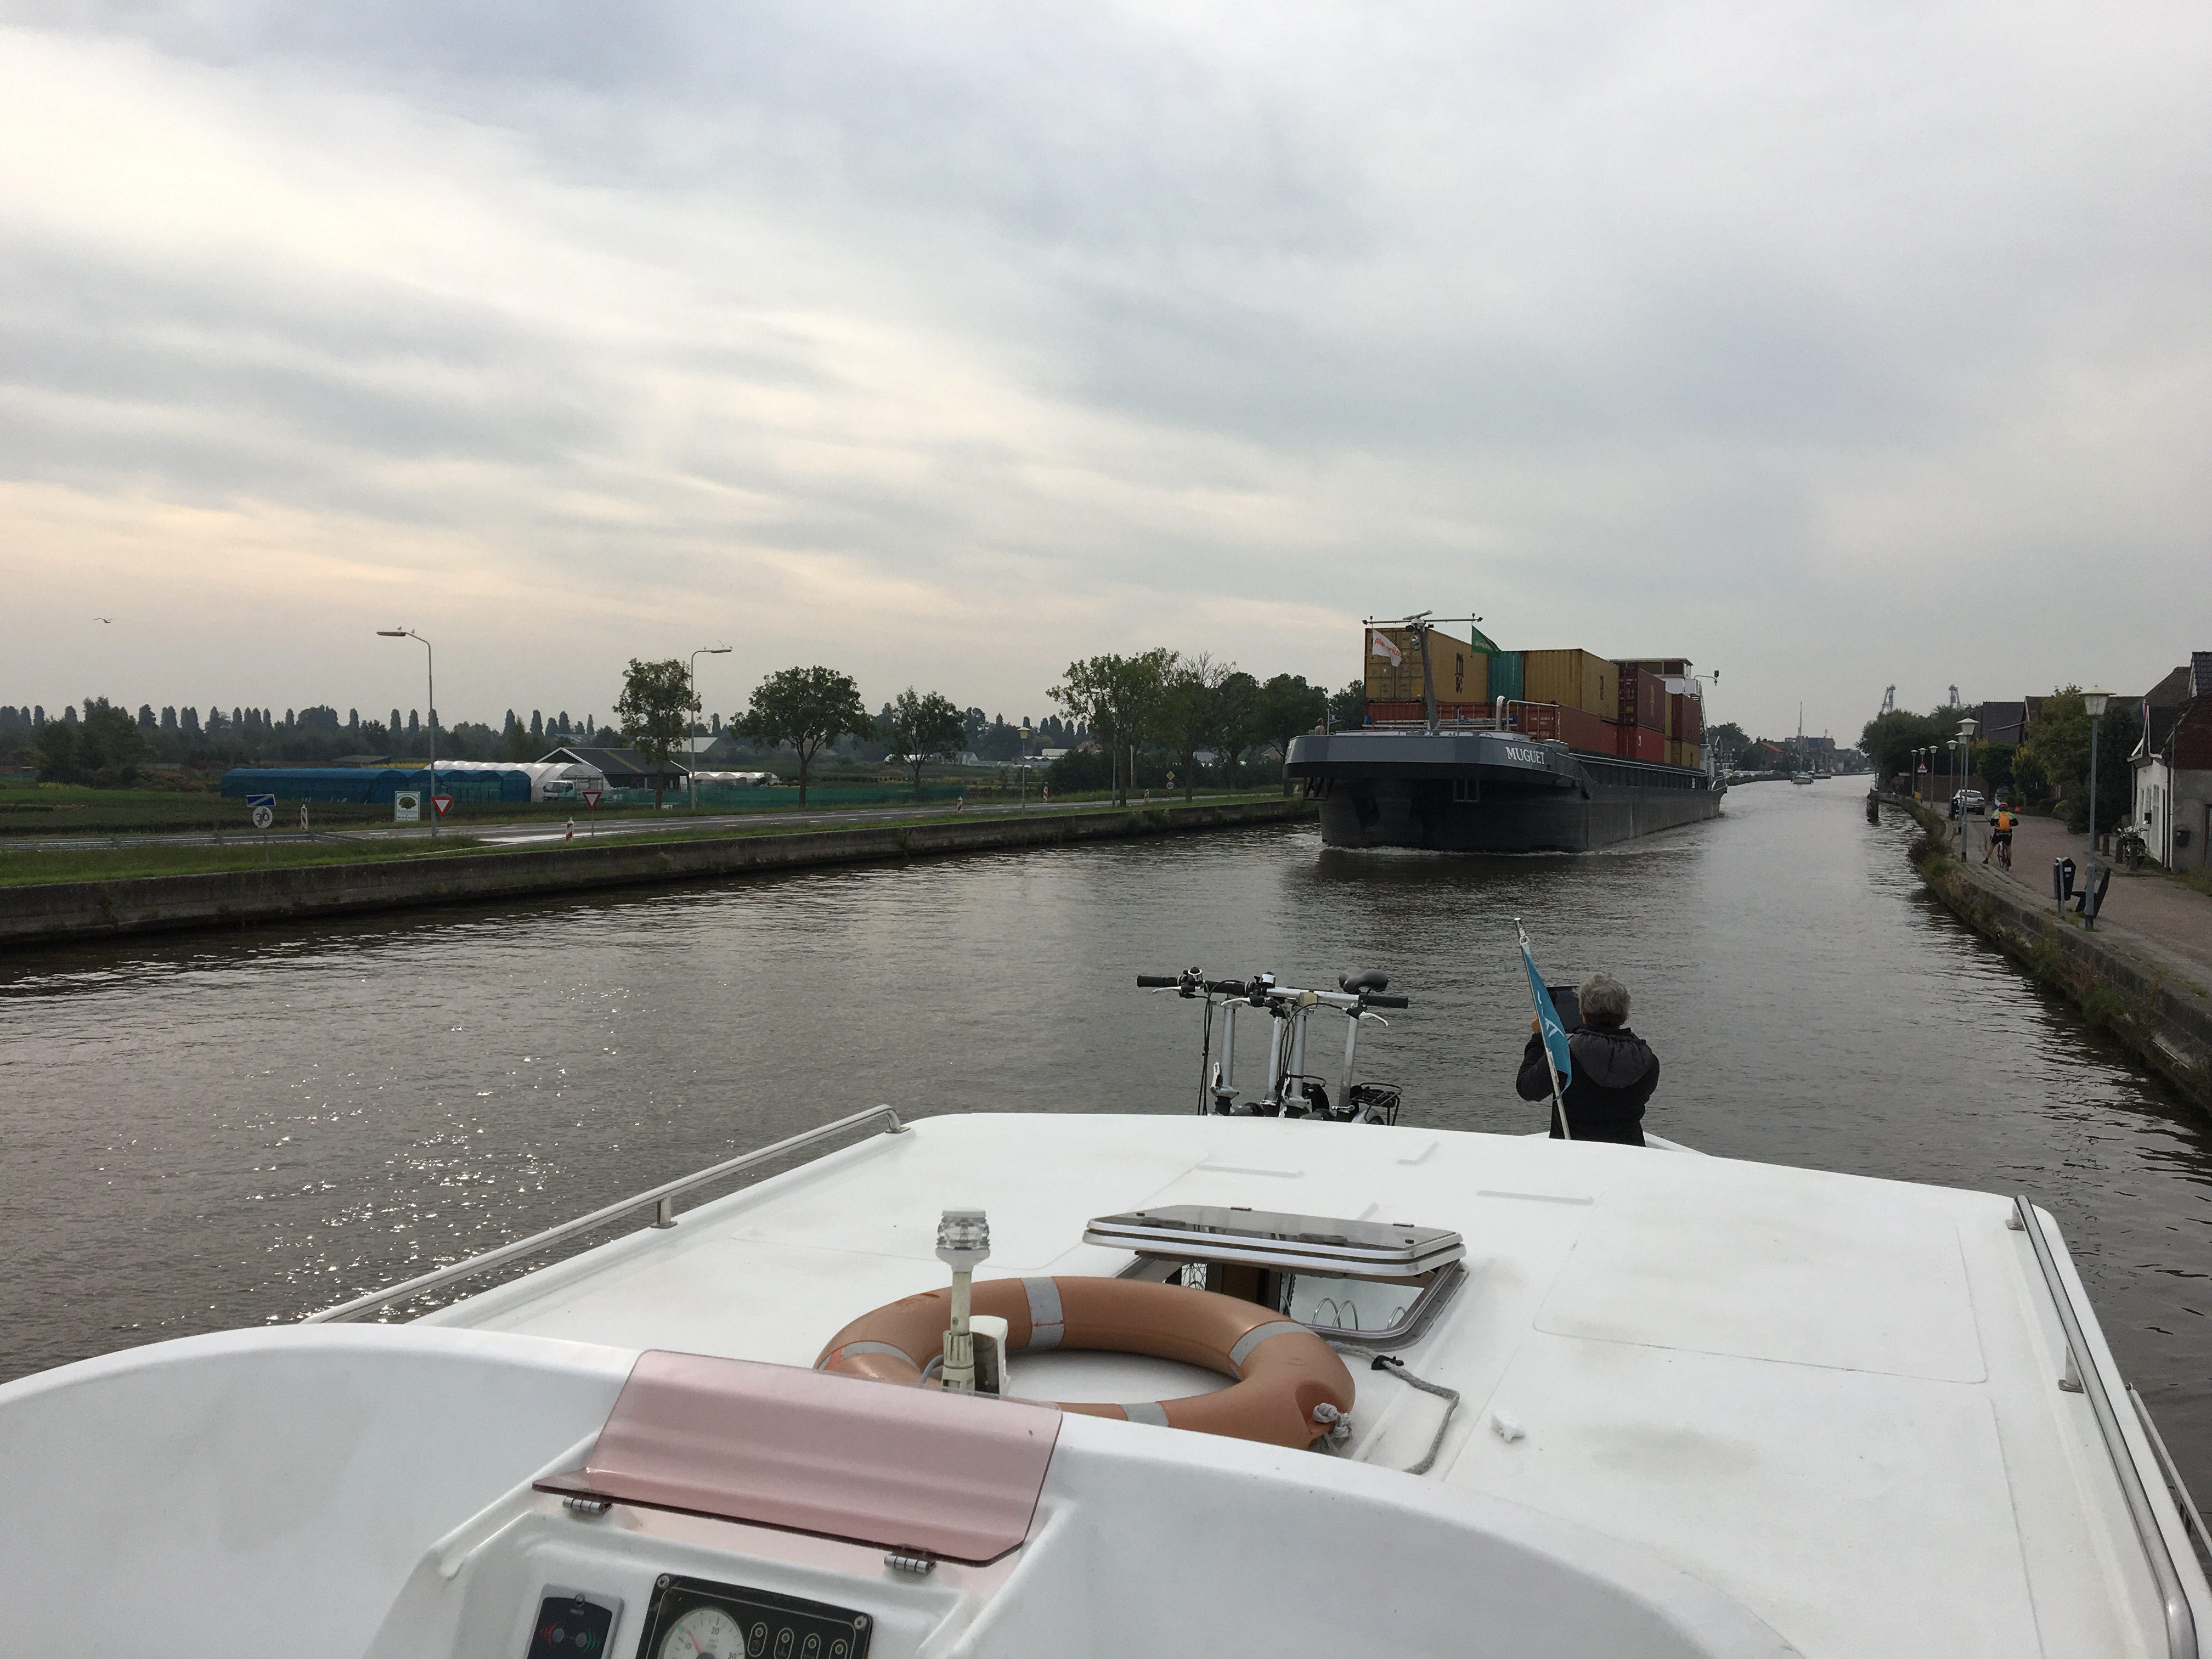 container barge on canal - Gamesforlanguage.com